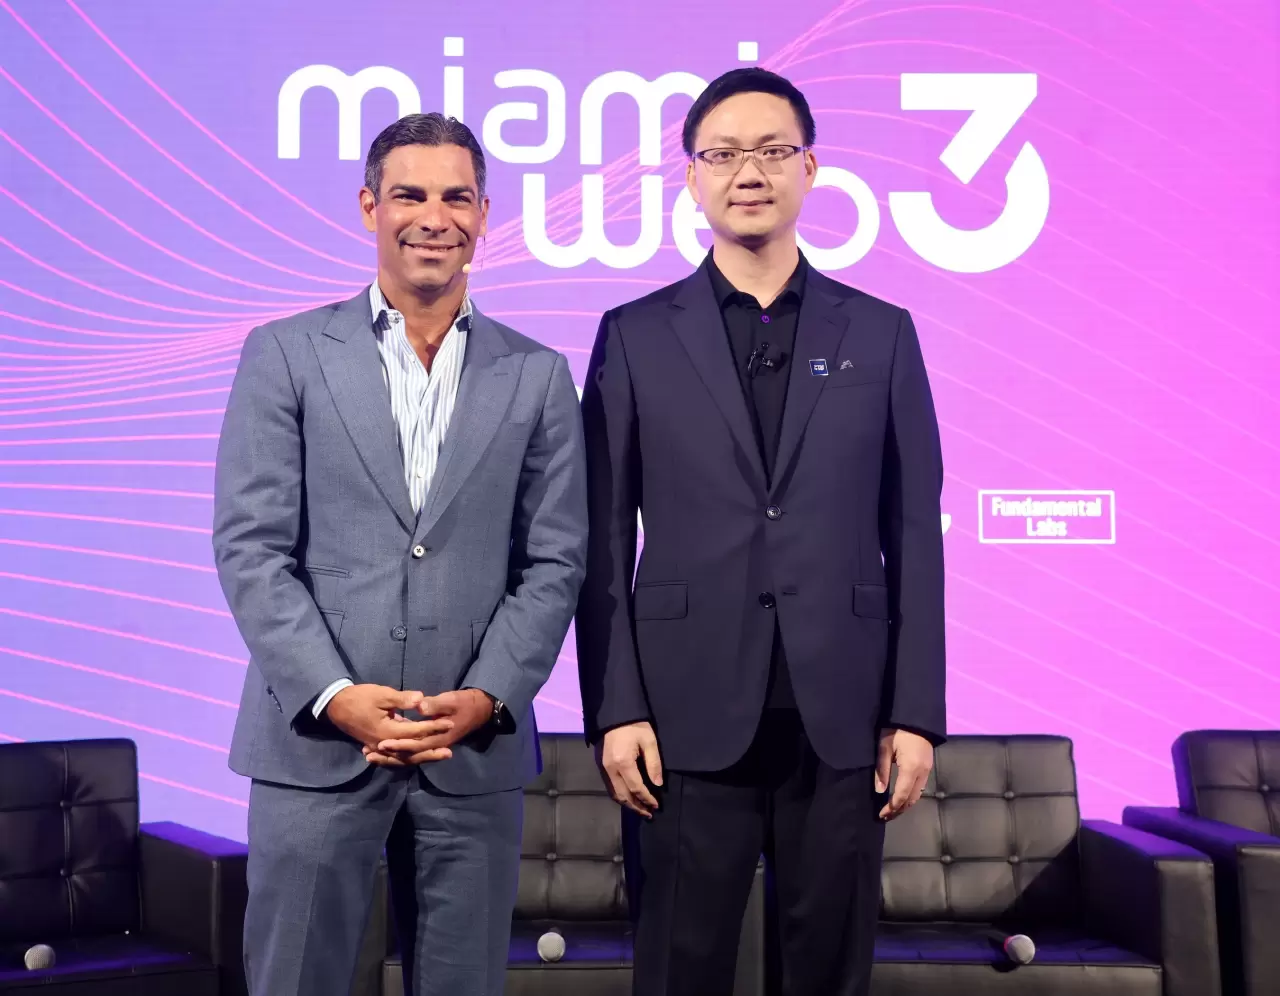 Francis Suarez, Mayor of Miami (left) and Raymond Yuan, Founder and Chairman of CTH and Atlas(right), at MiamiWeb3 Summit (PRNewsfoto/Atlas Technology Management) img#1